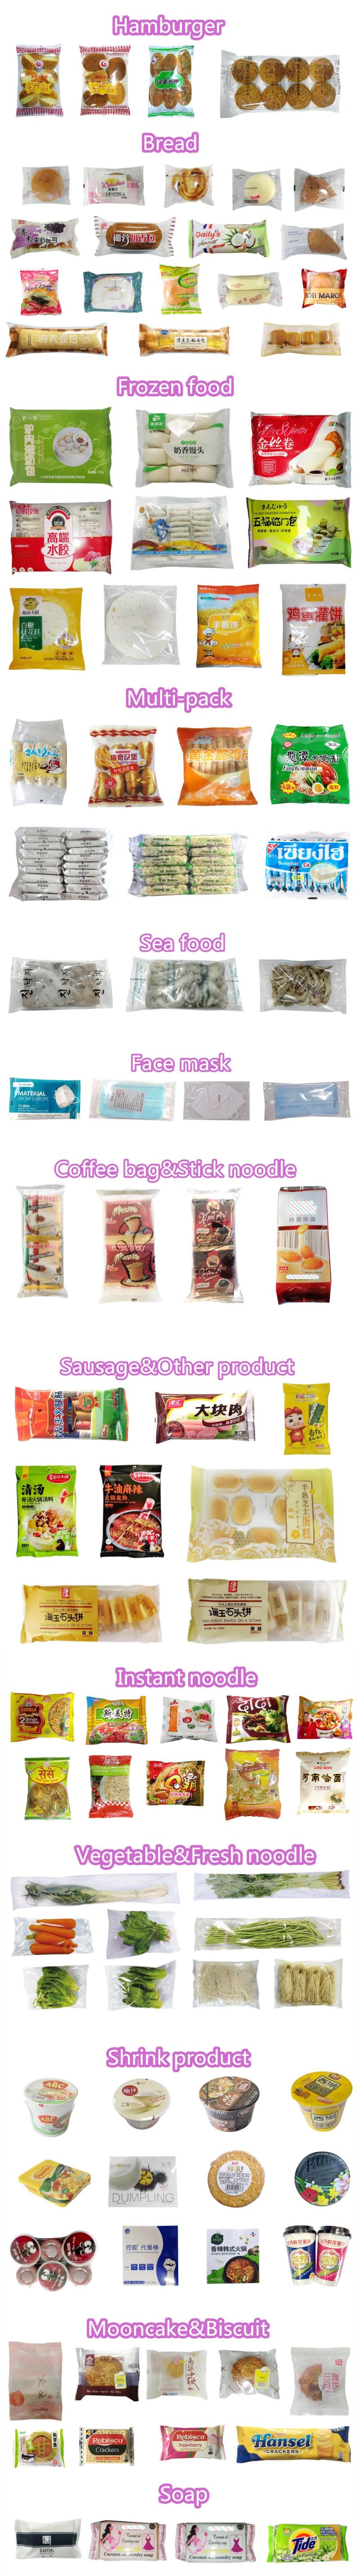 Automatic Pouch Bag Sealing Packaging Machinery for Wet Rice Noodle